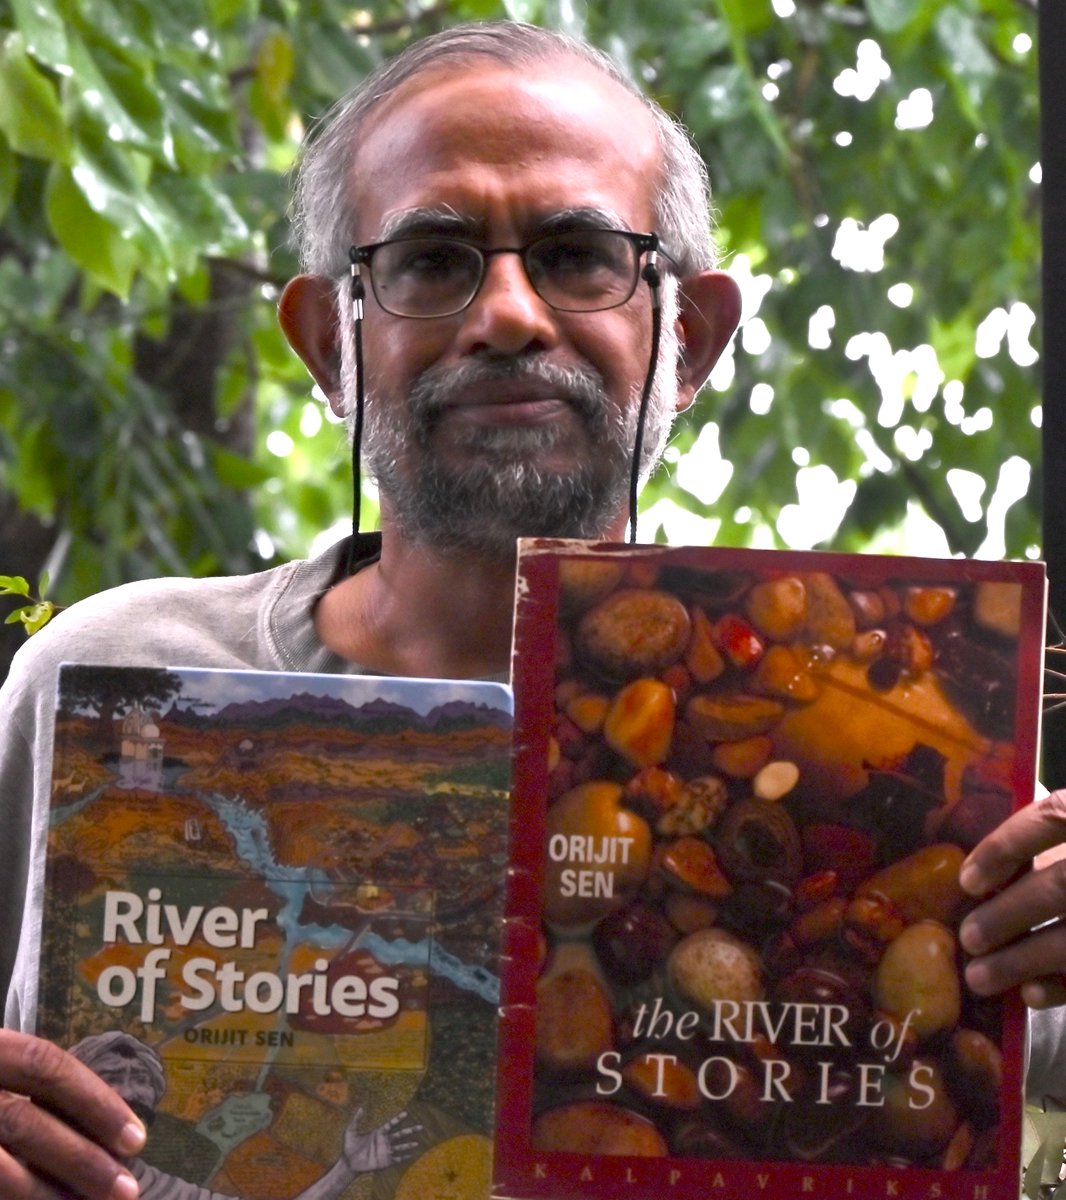 Happy to receive 25th anniversary edition of Orijit Sen's brilliant 'River of Stories'. Kalpavriksh was glad to publish 1st edition in 1994 (w. Amita Baviskar's amazing lettering) - likely India's first ever graphic novel! Based on Narmada movement, as relevant now as then